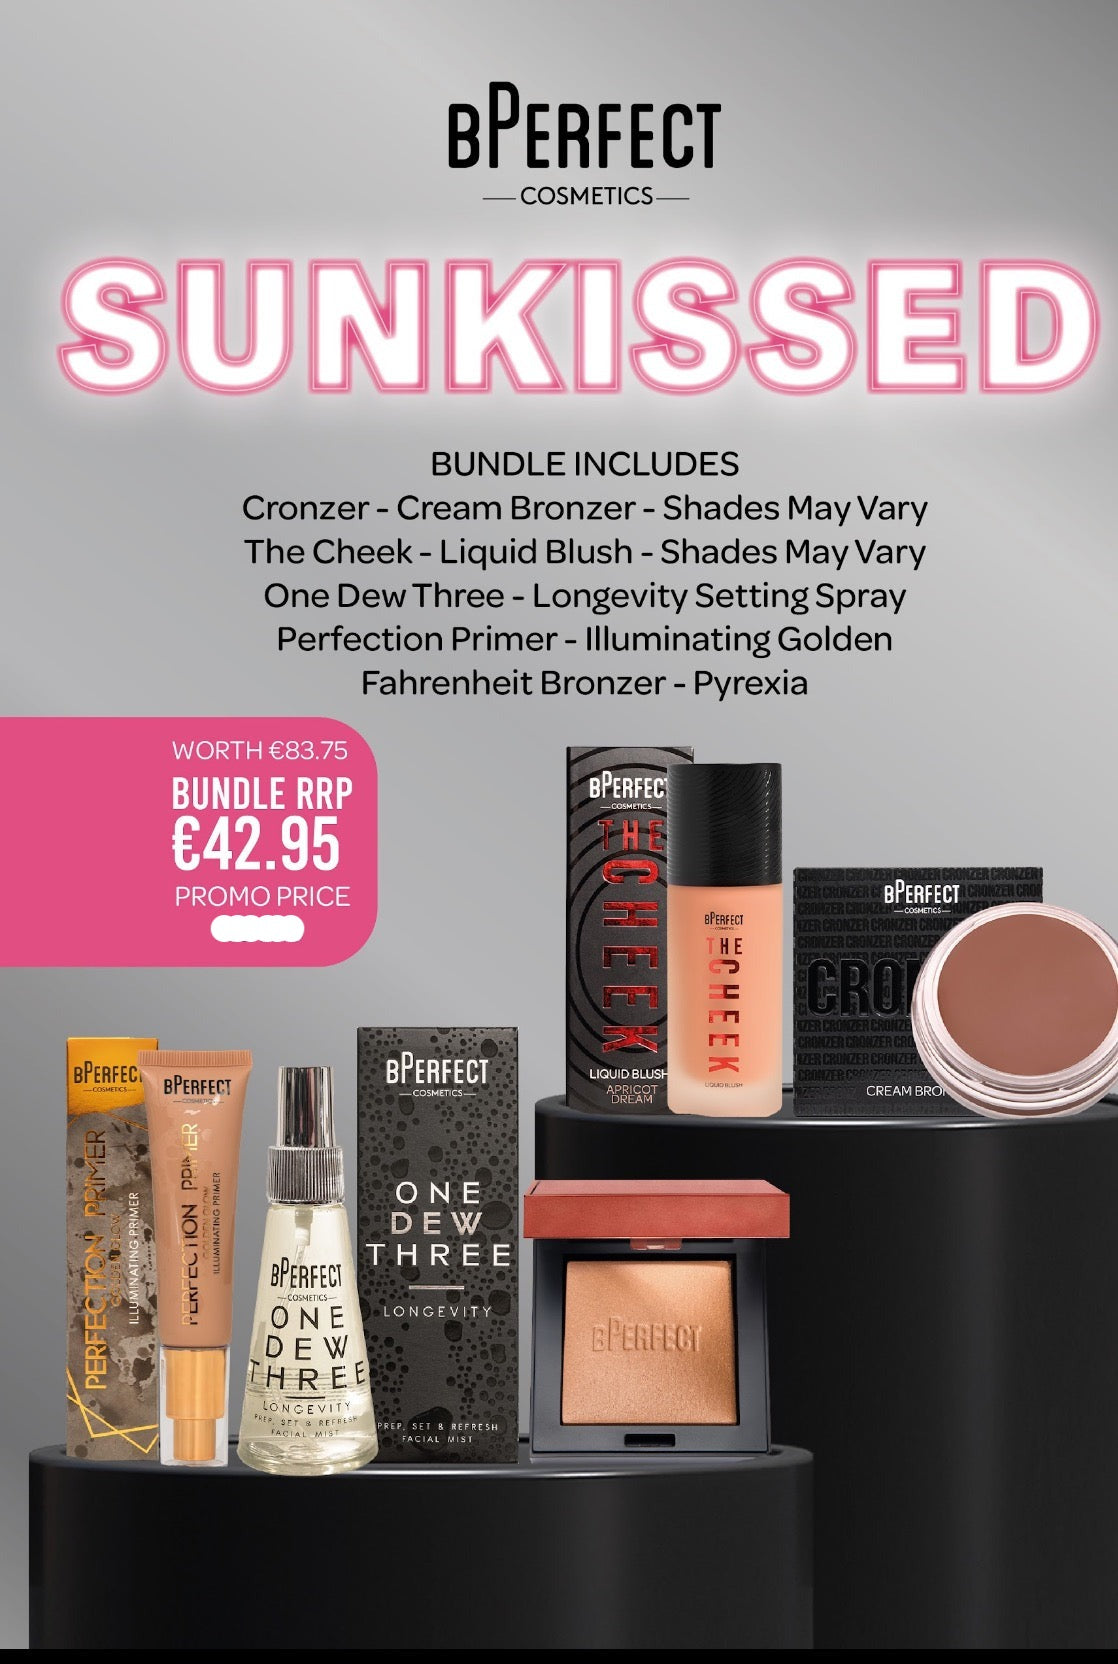 BPerfect the sunkissed Set